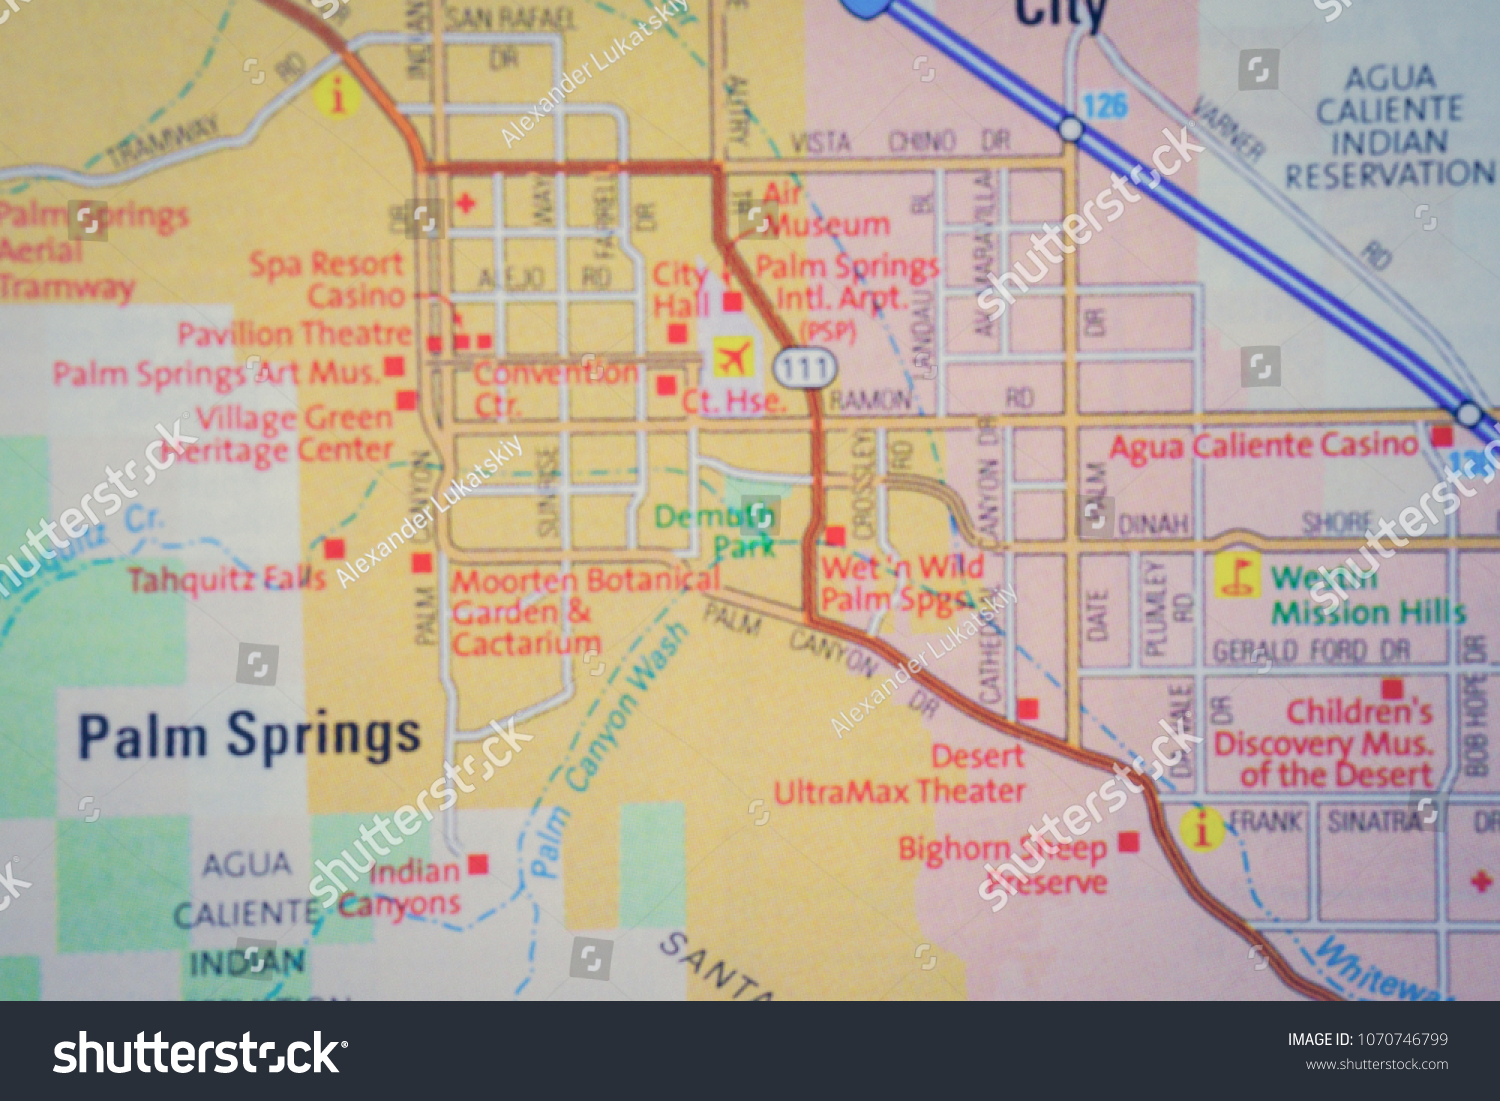 palm springs on the map Palm Springs City On Usa Map Stock Photo Edit Now 1070746799 palm springs on the map